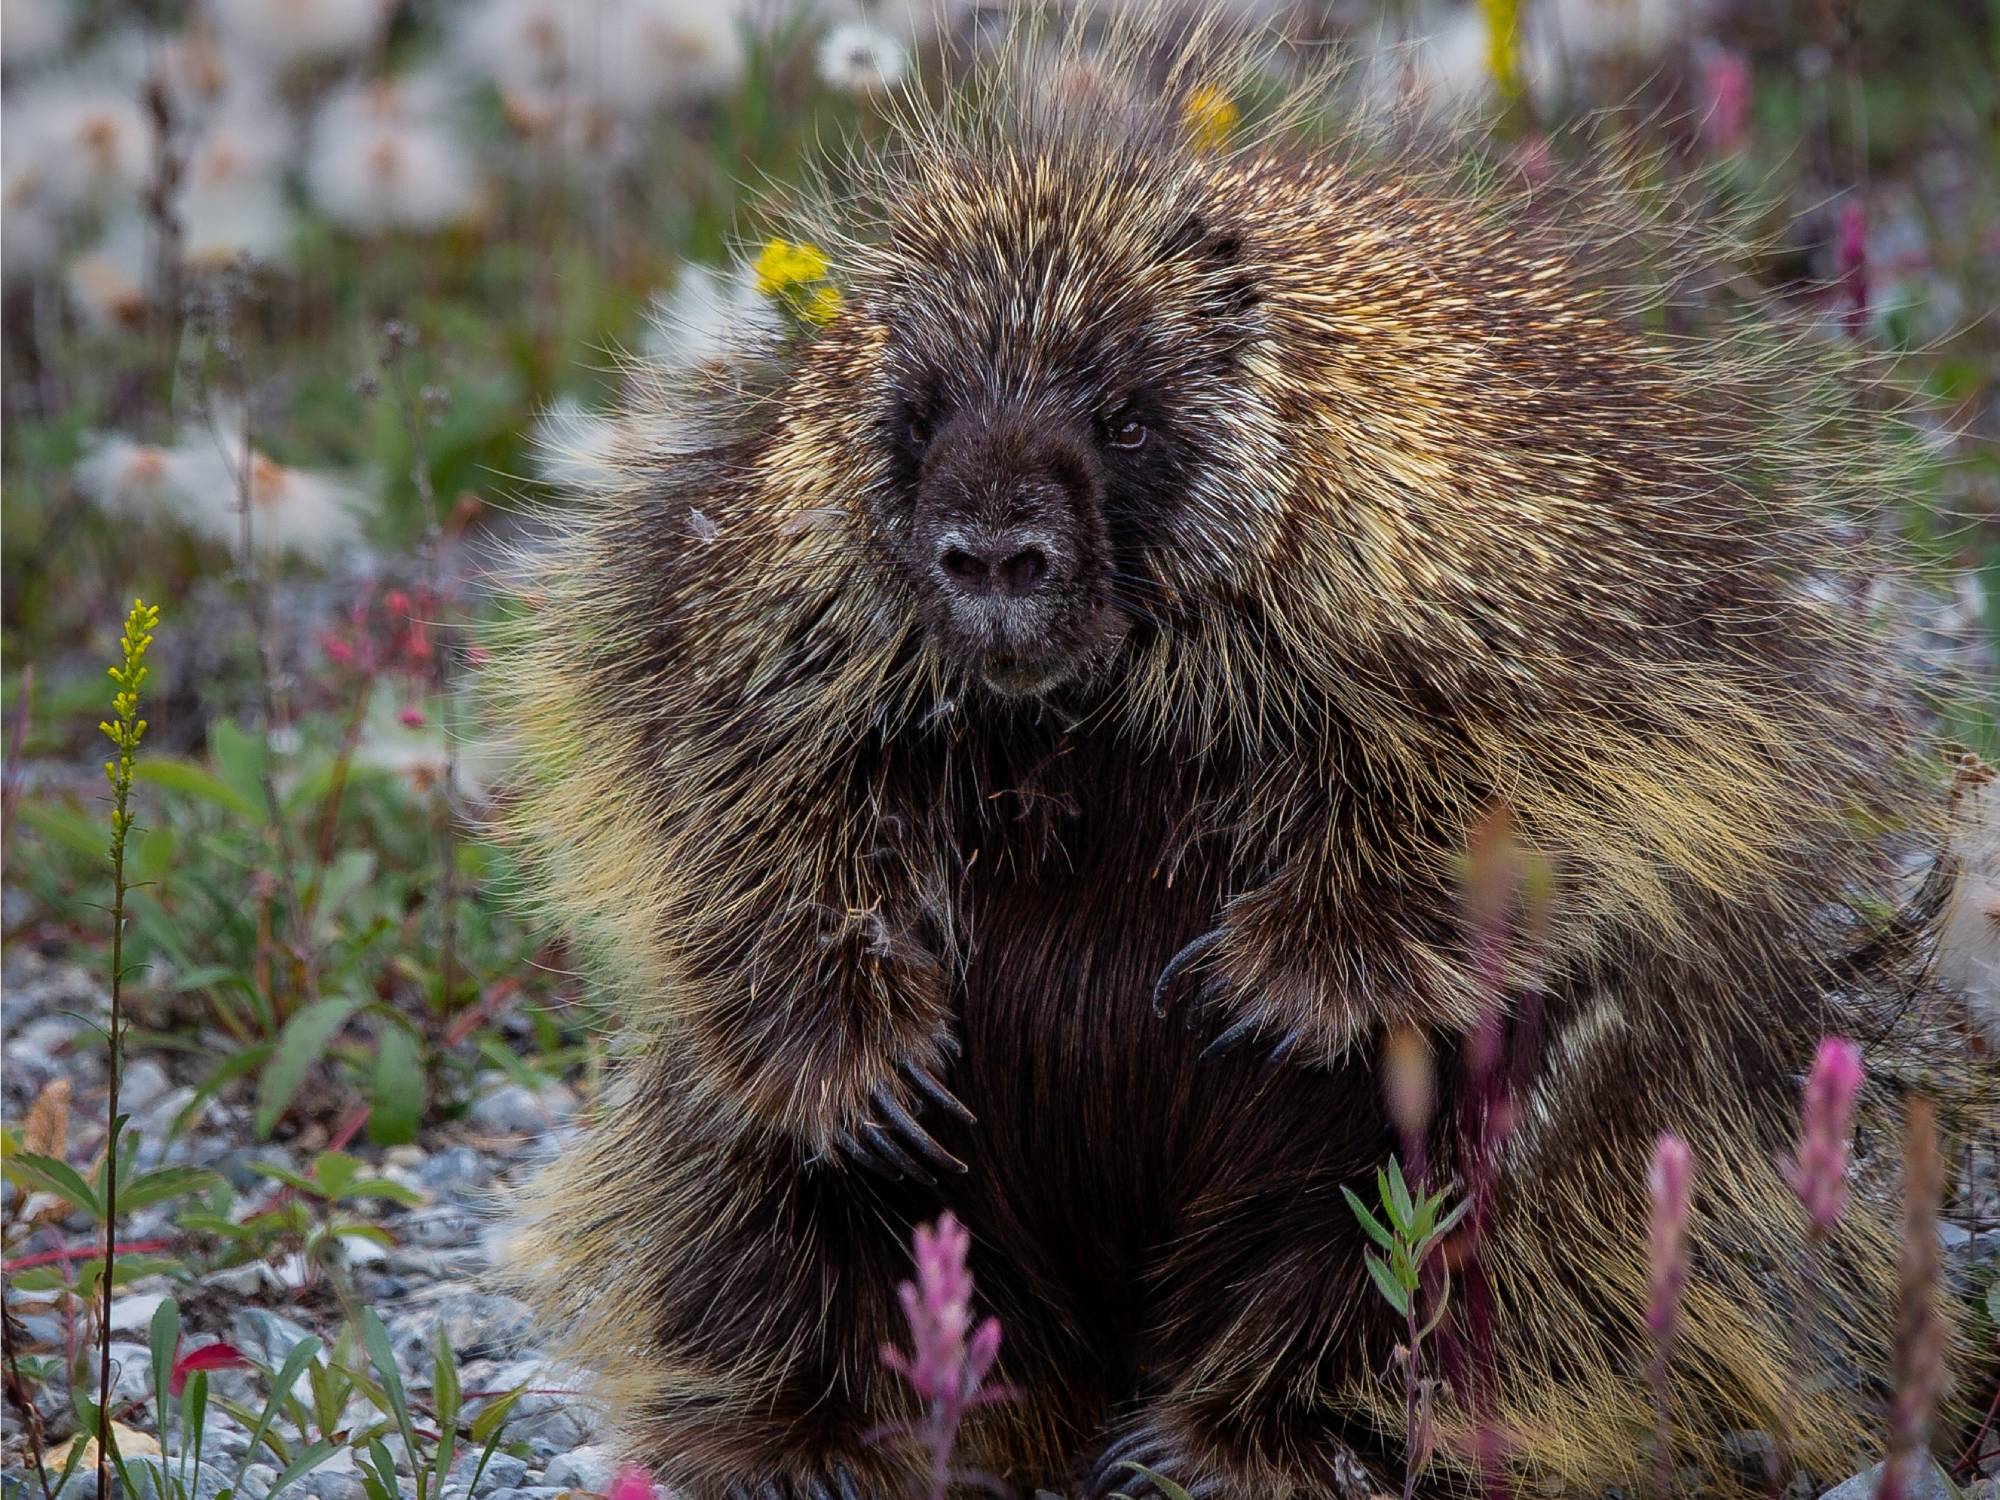 North american porcupine sitting on the ground among wild flower